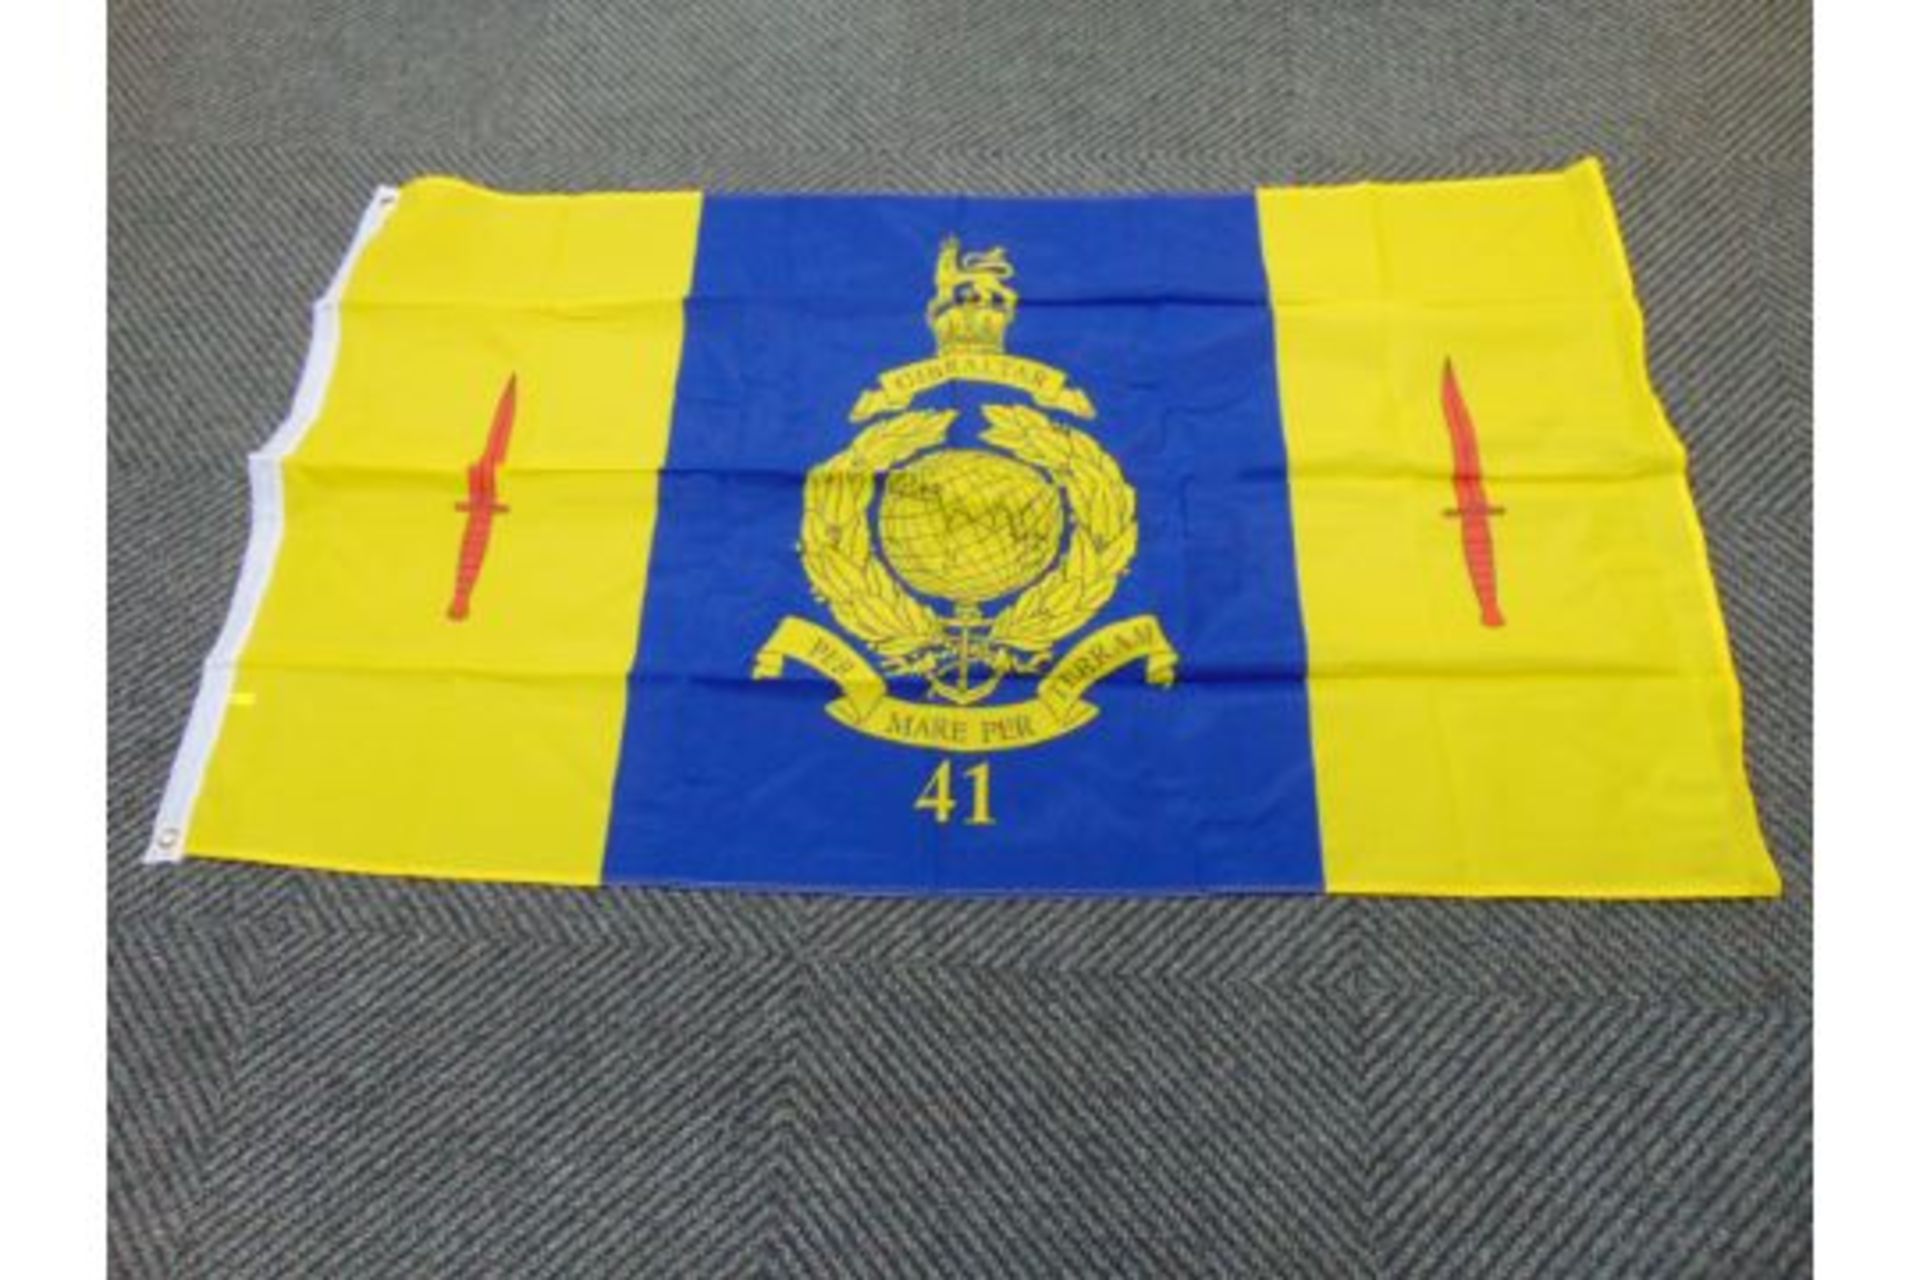 41 Commando Royal Marines Flag - 5ft x 3ft with Metal Eyelets.